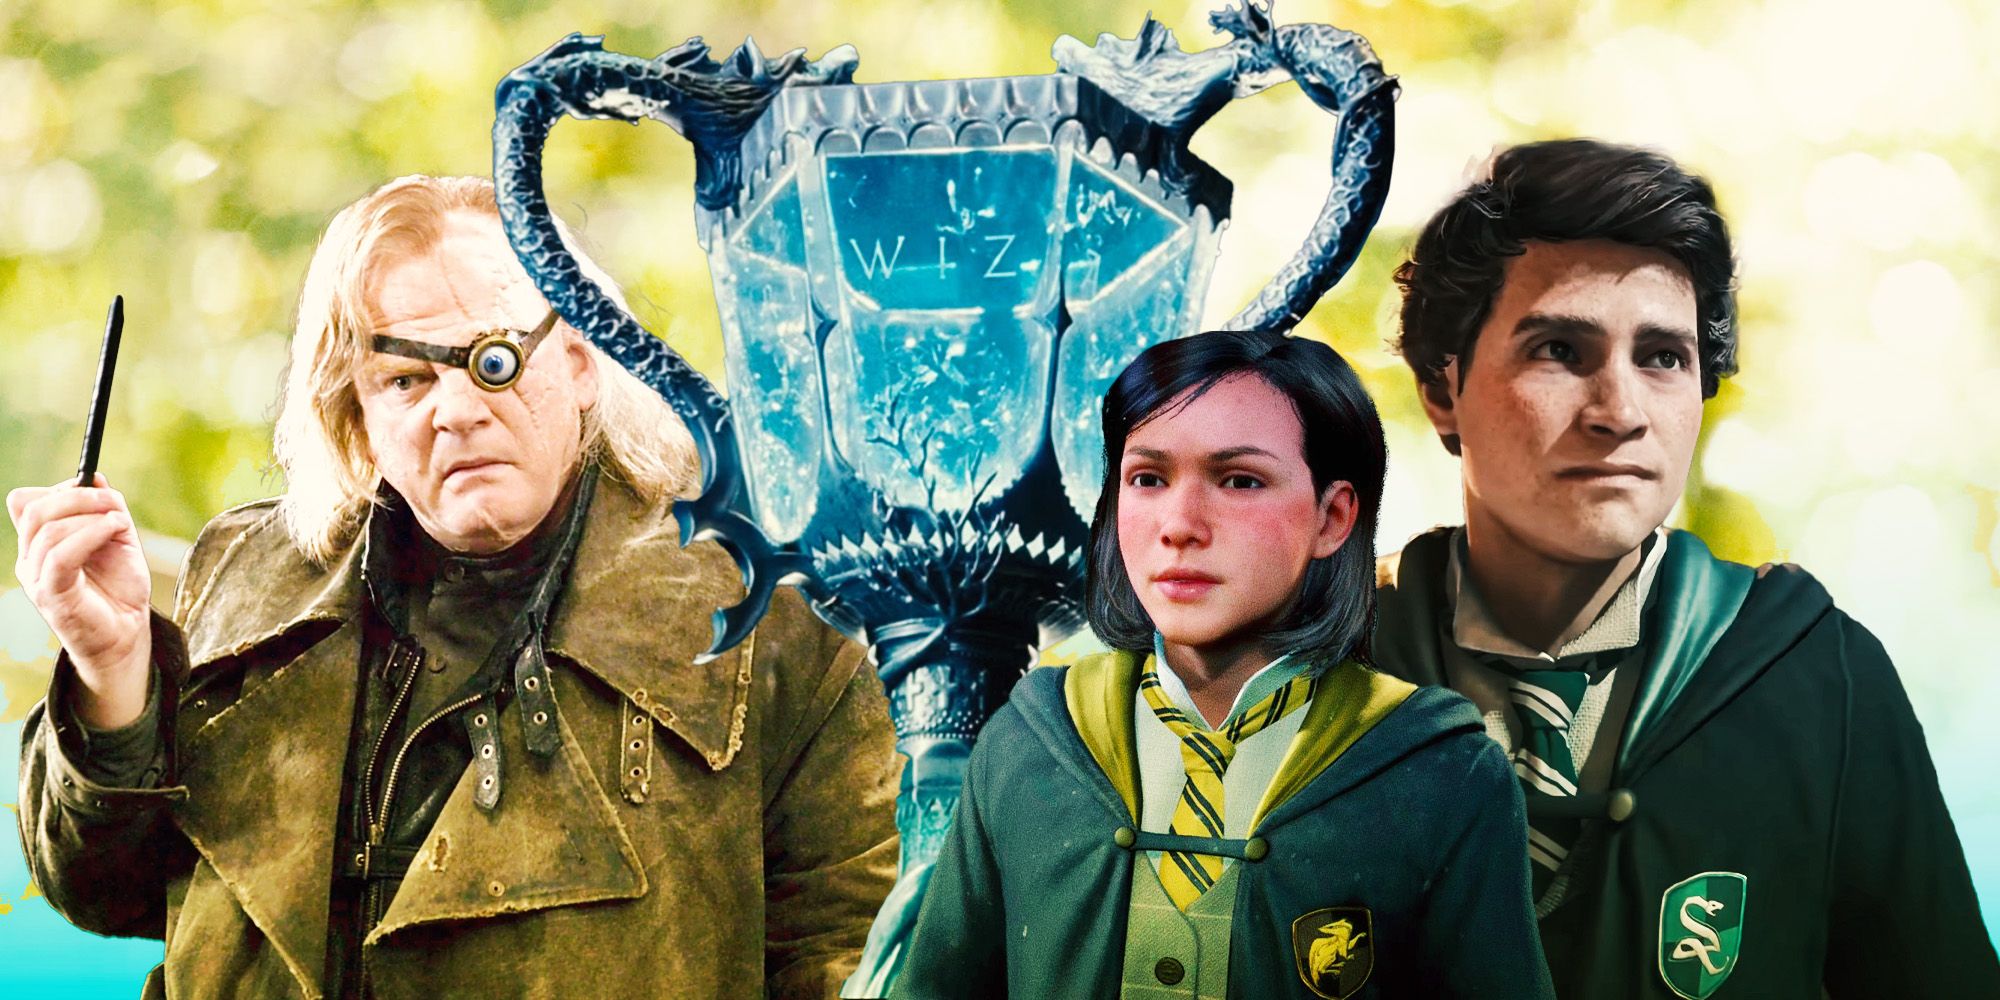 Alastor Moody and the Triwizard Cup from the Goblet of Fire film, with Poppy Sweeting and Sebastian Sallow from Hogwarts Legacy.